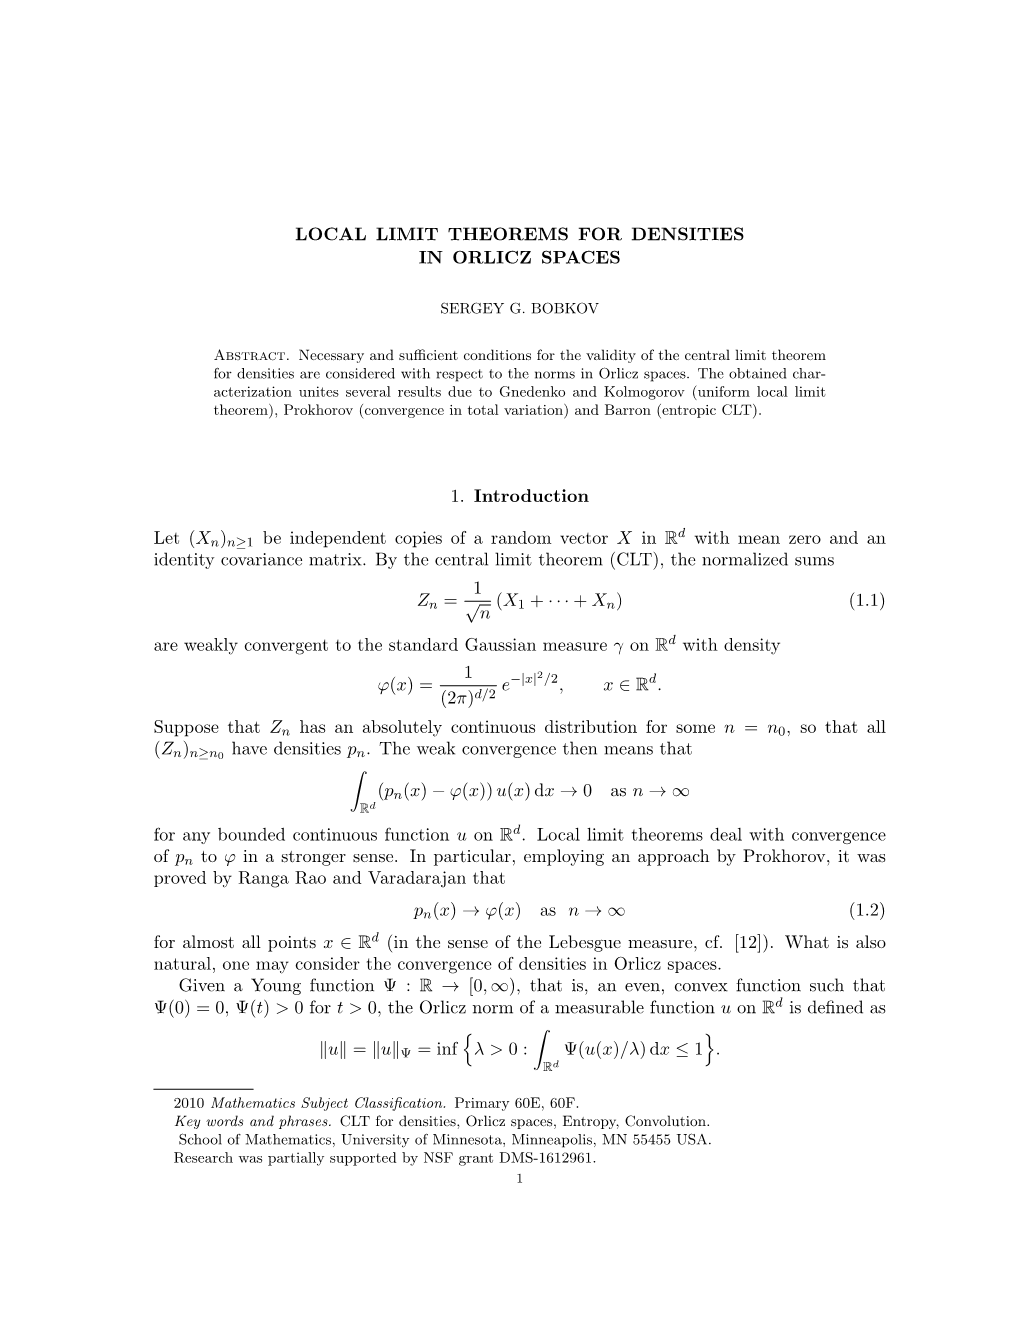 Local Limit Theorems for Densities in Orlicz Spaces